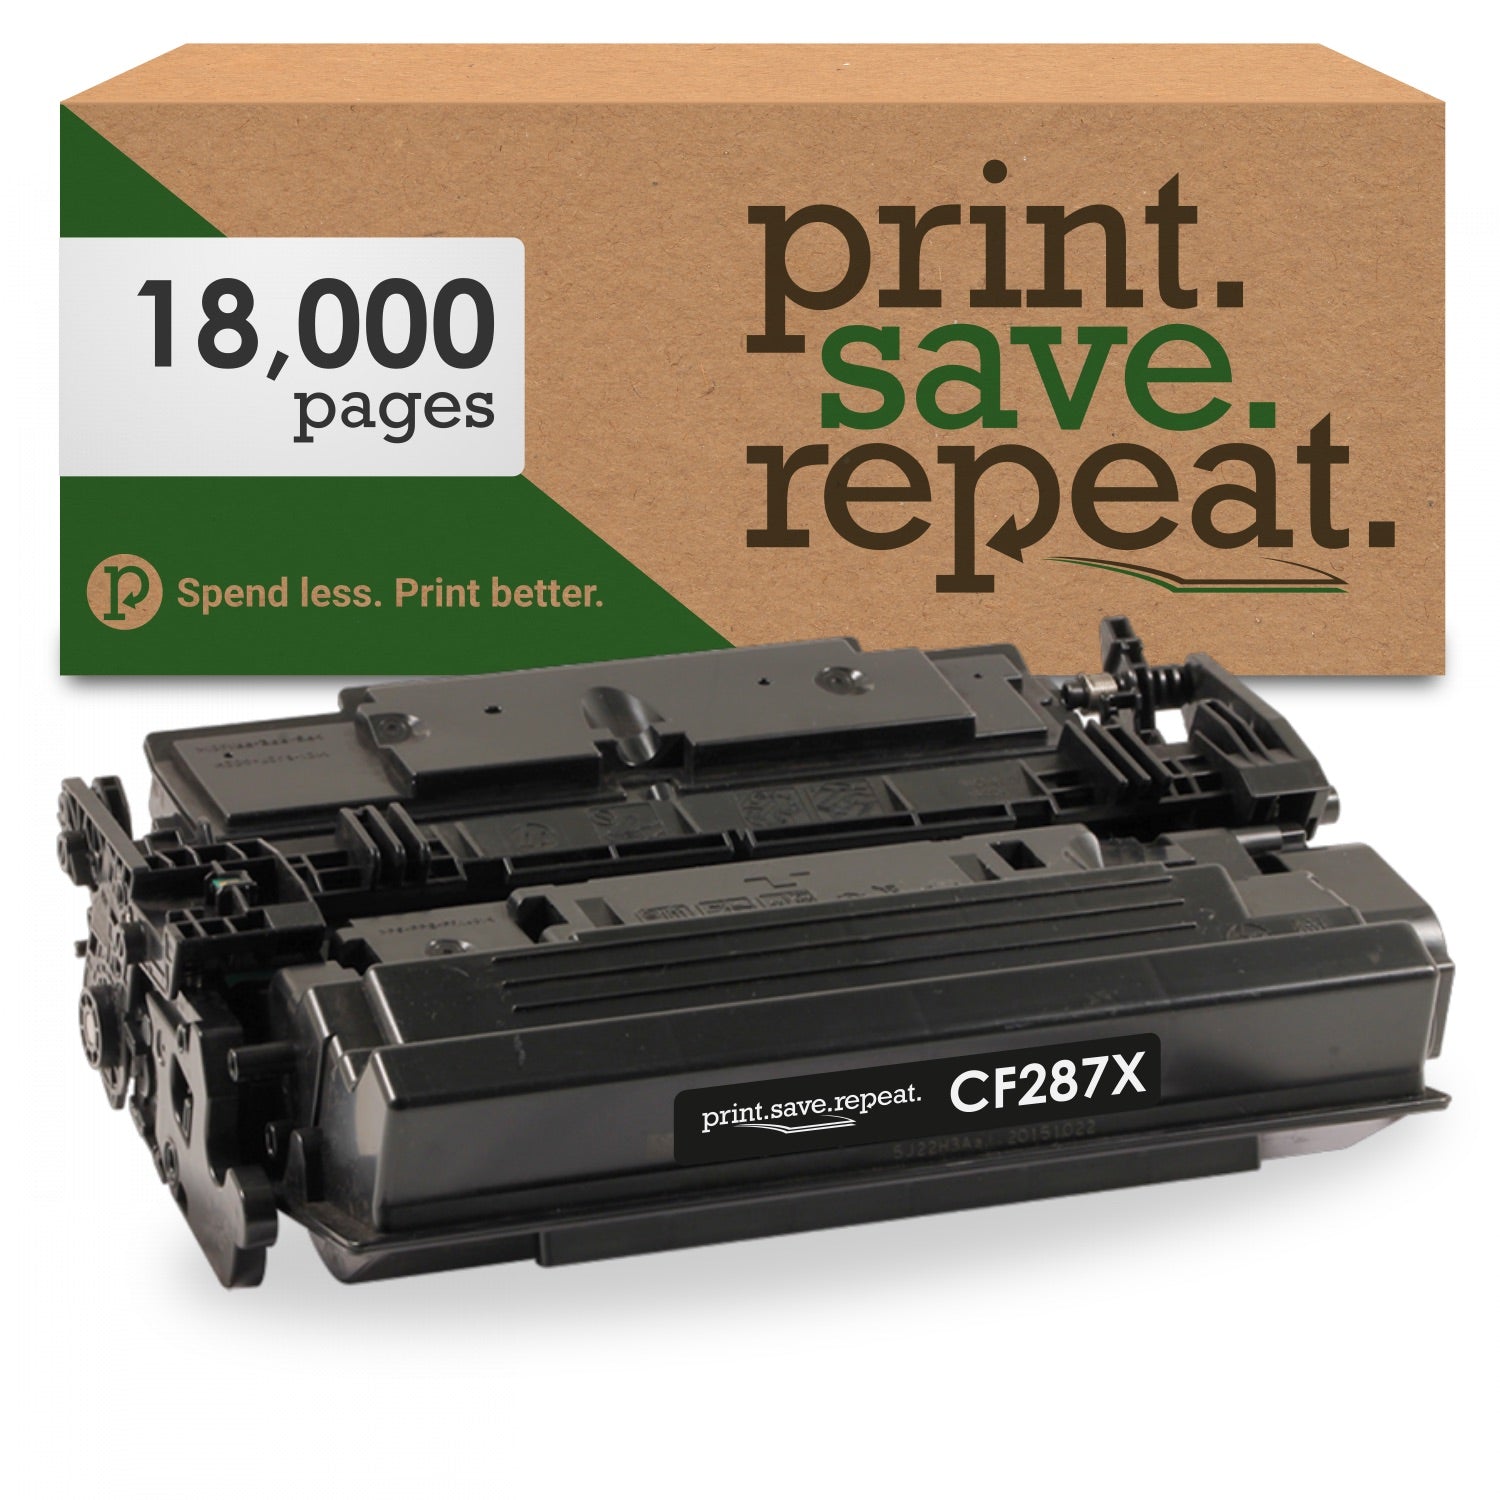 Print.Save.Repeat. HP 87X (CF287X) High Yield Compatible Toner Cartridge [18,000 Pages]